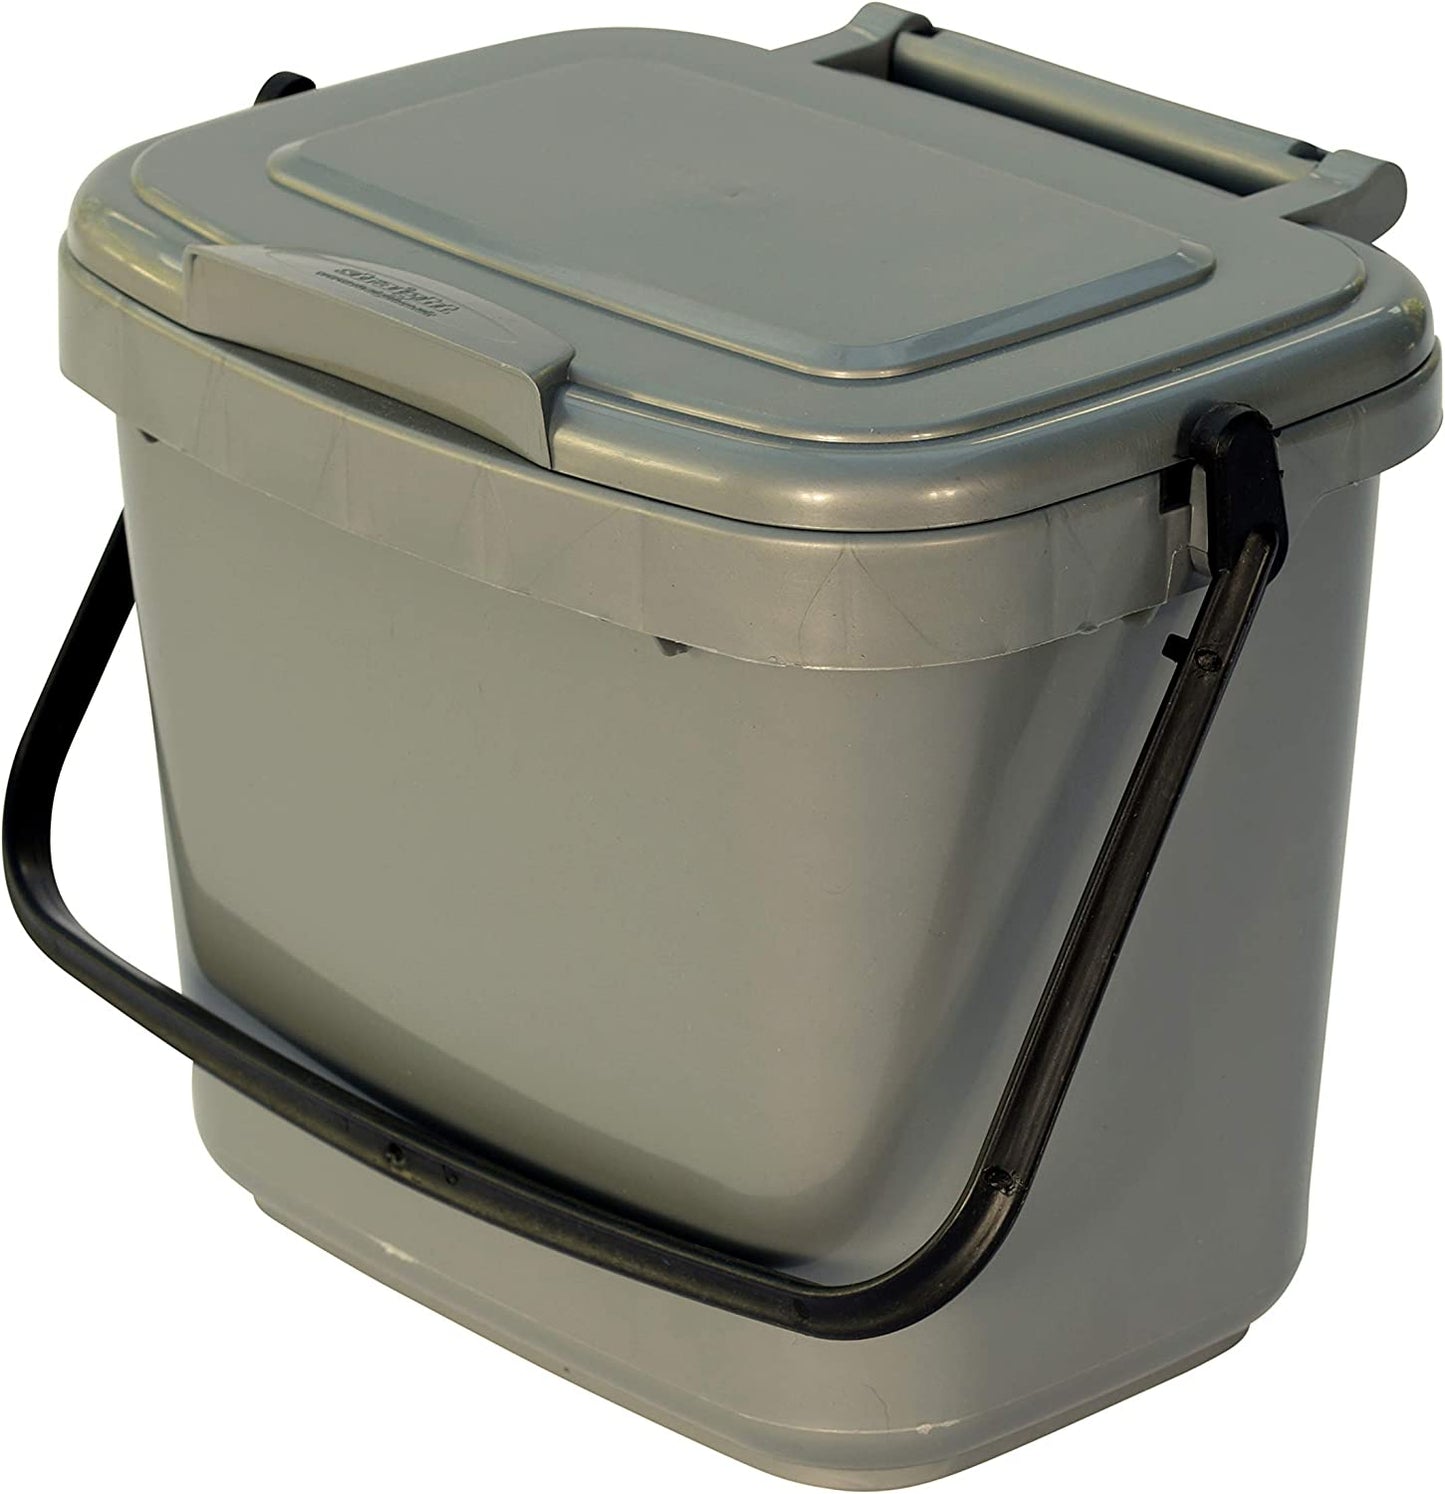 Silver Grey Kitchen Compost Caddy (5L - Small) - for Food Waste Recycling (5 Litre) - 5L Plastic Composting Bin